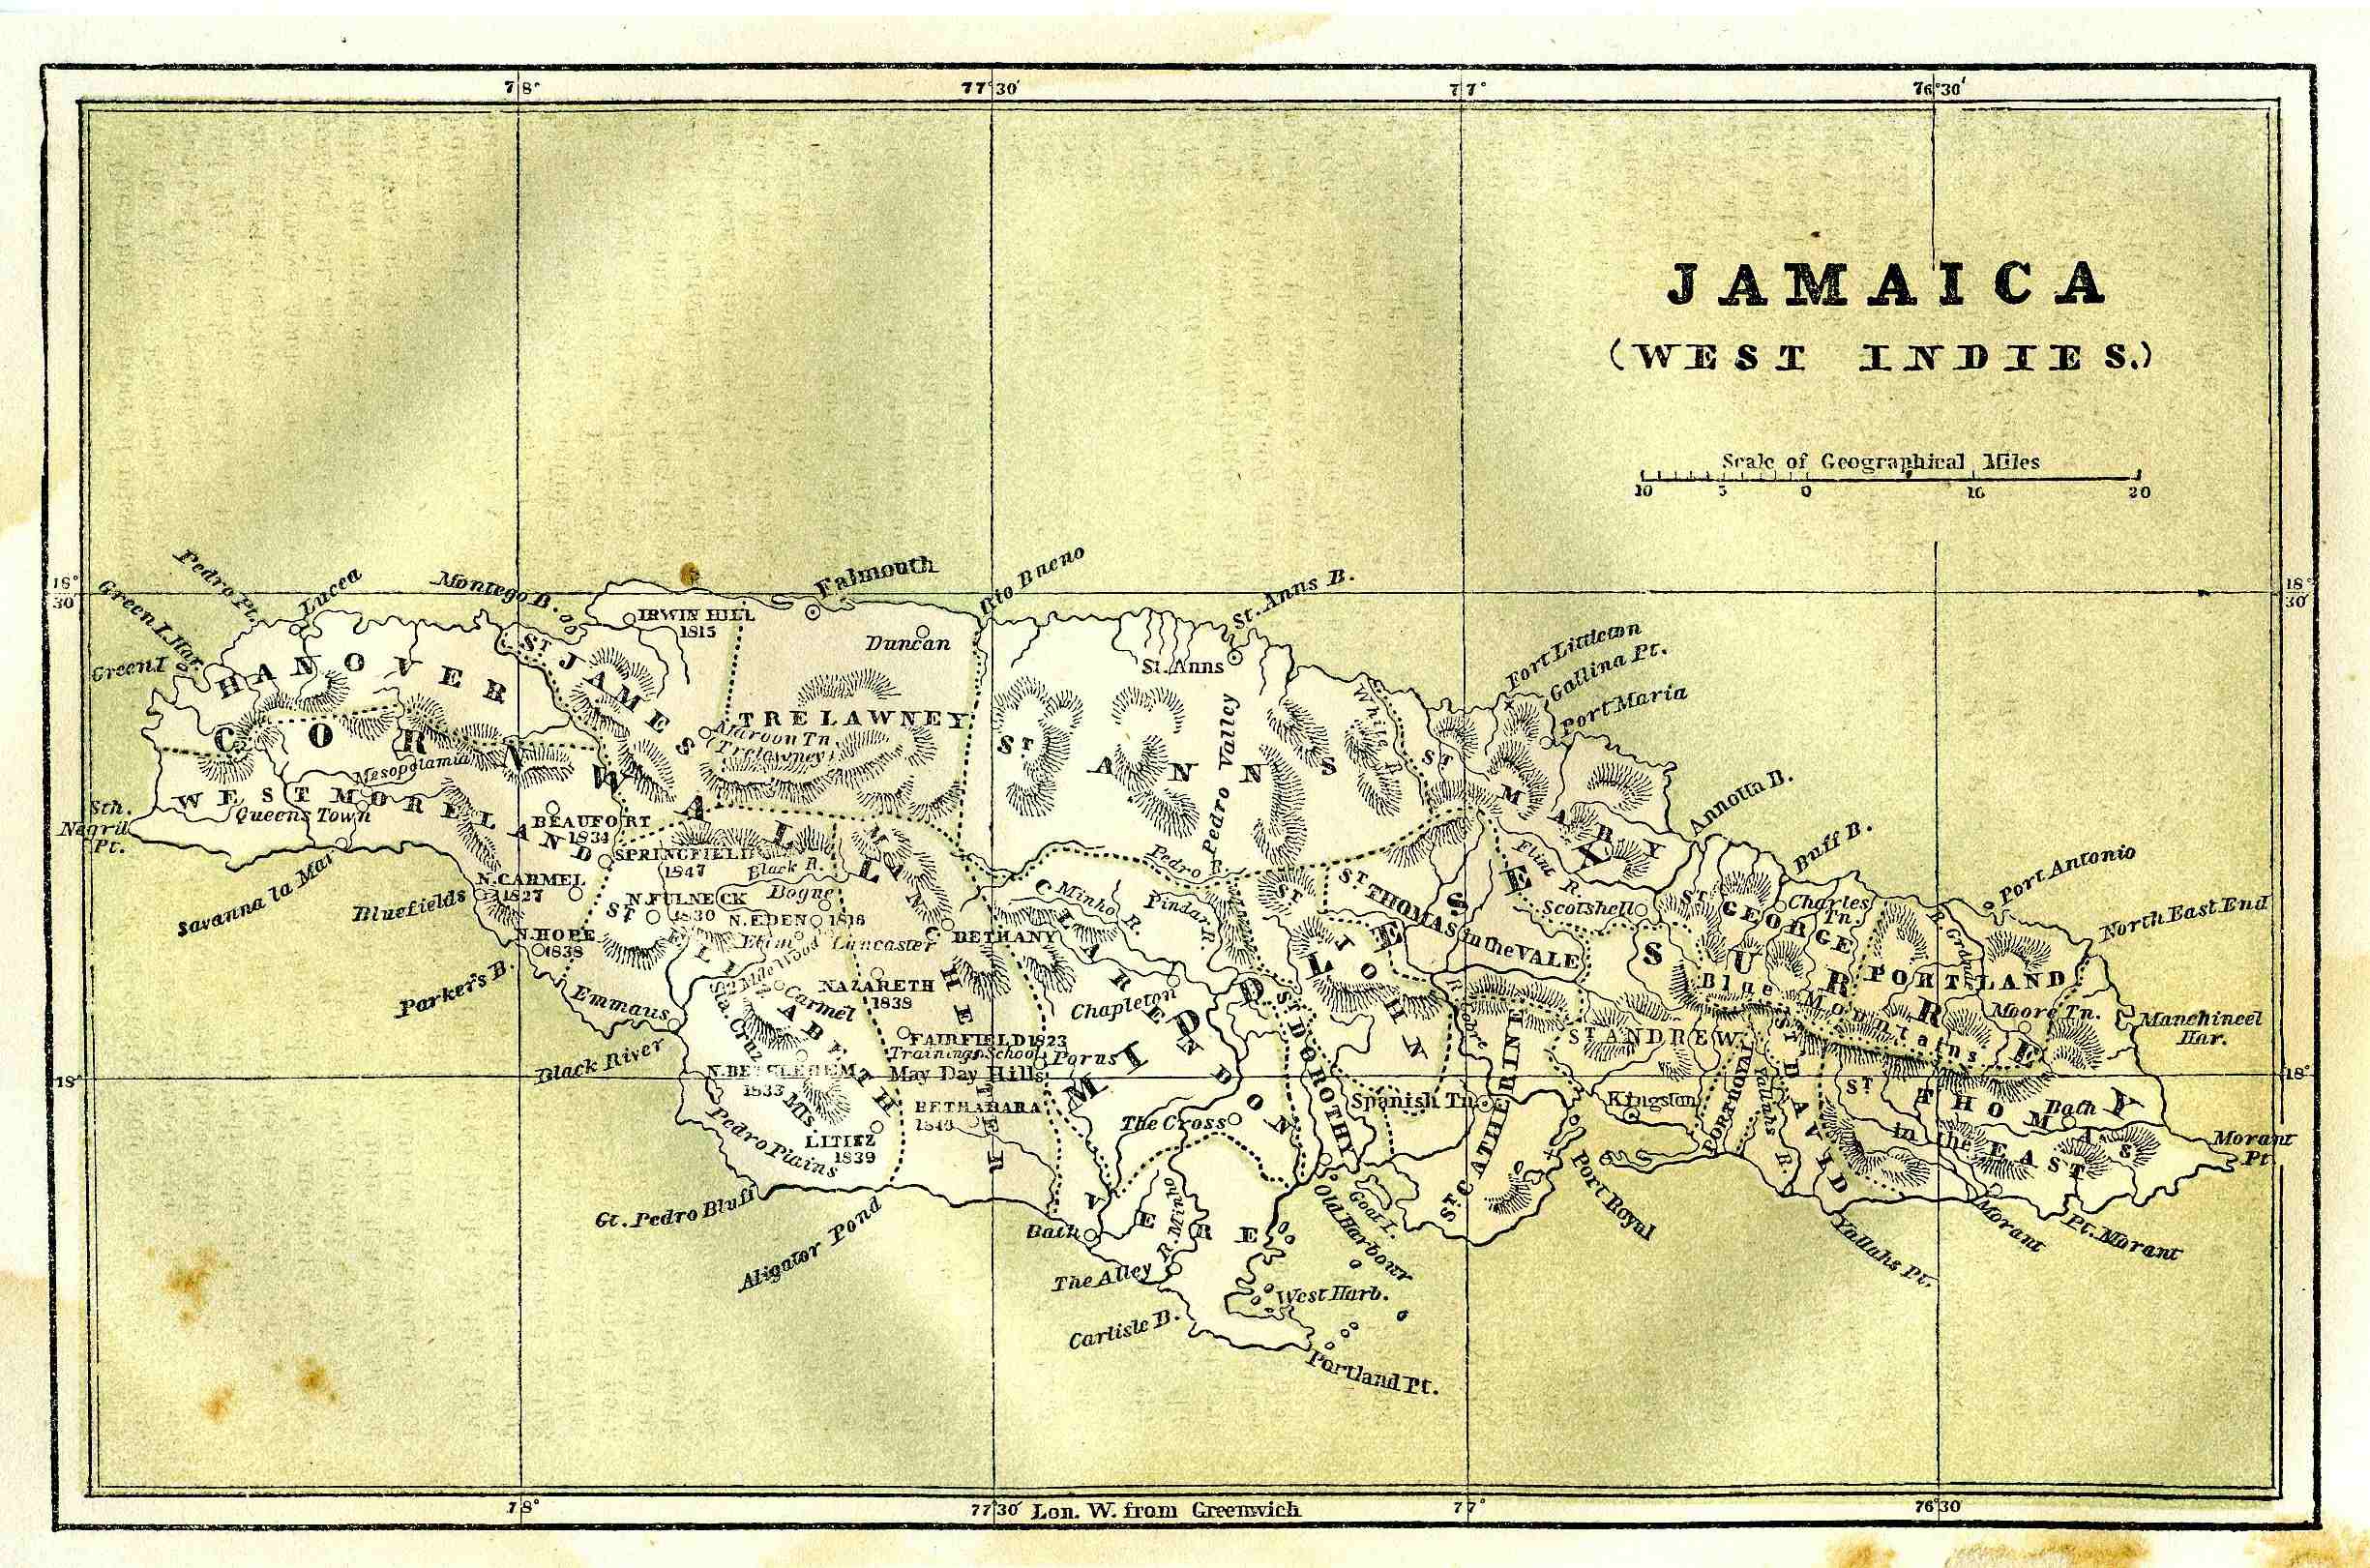 Newcomb's Jamaica map - 1854